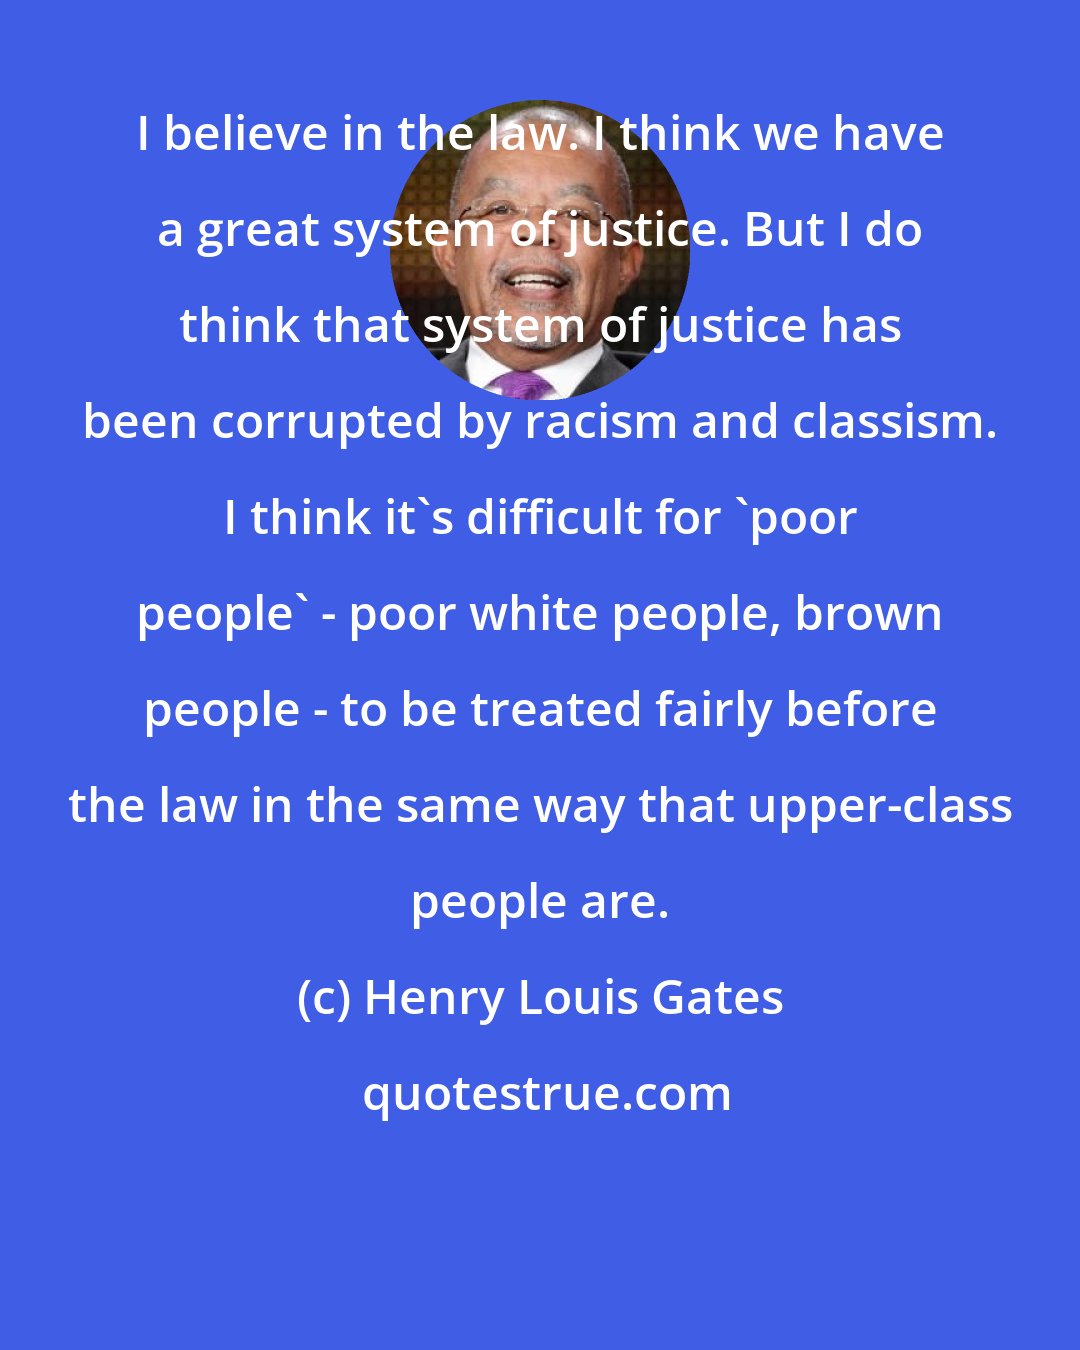 Henry Louis Gates: I believe in the law. I think we have a great system of justice. But I do think that system of justice has been corrupted by racism and classism. I think it's difficult for 'poor people' - poor white people, brown people - to be treated fairly before the law in the same way that upper-class people are.